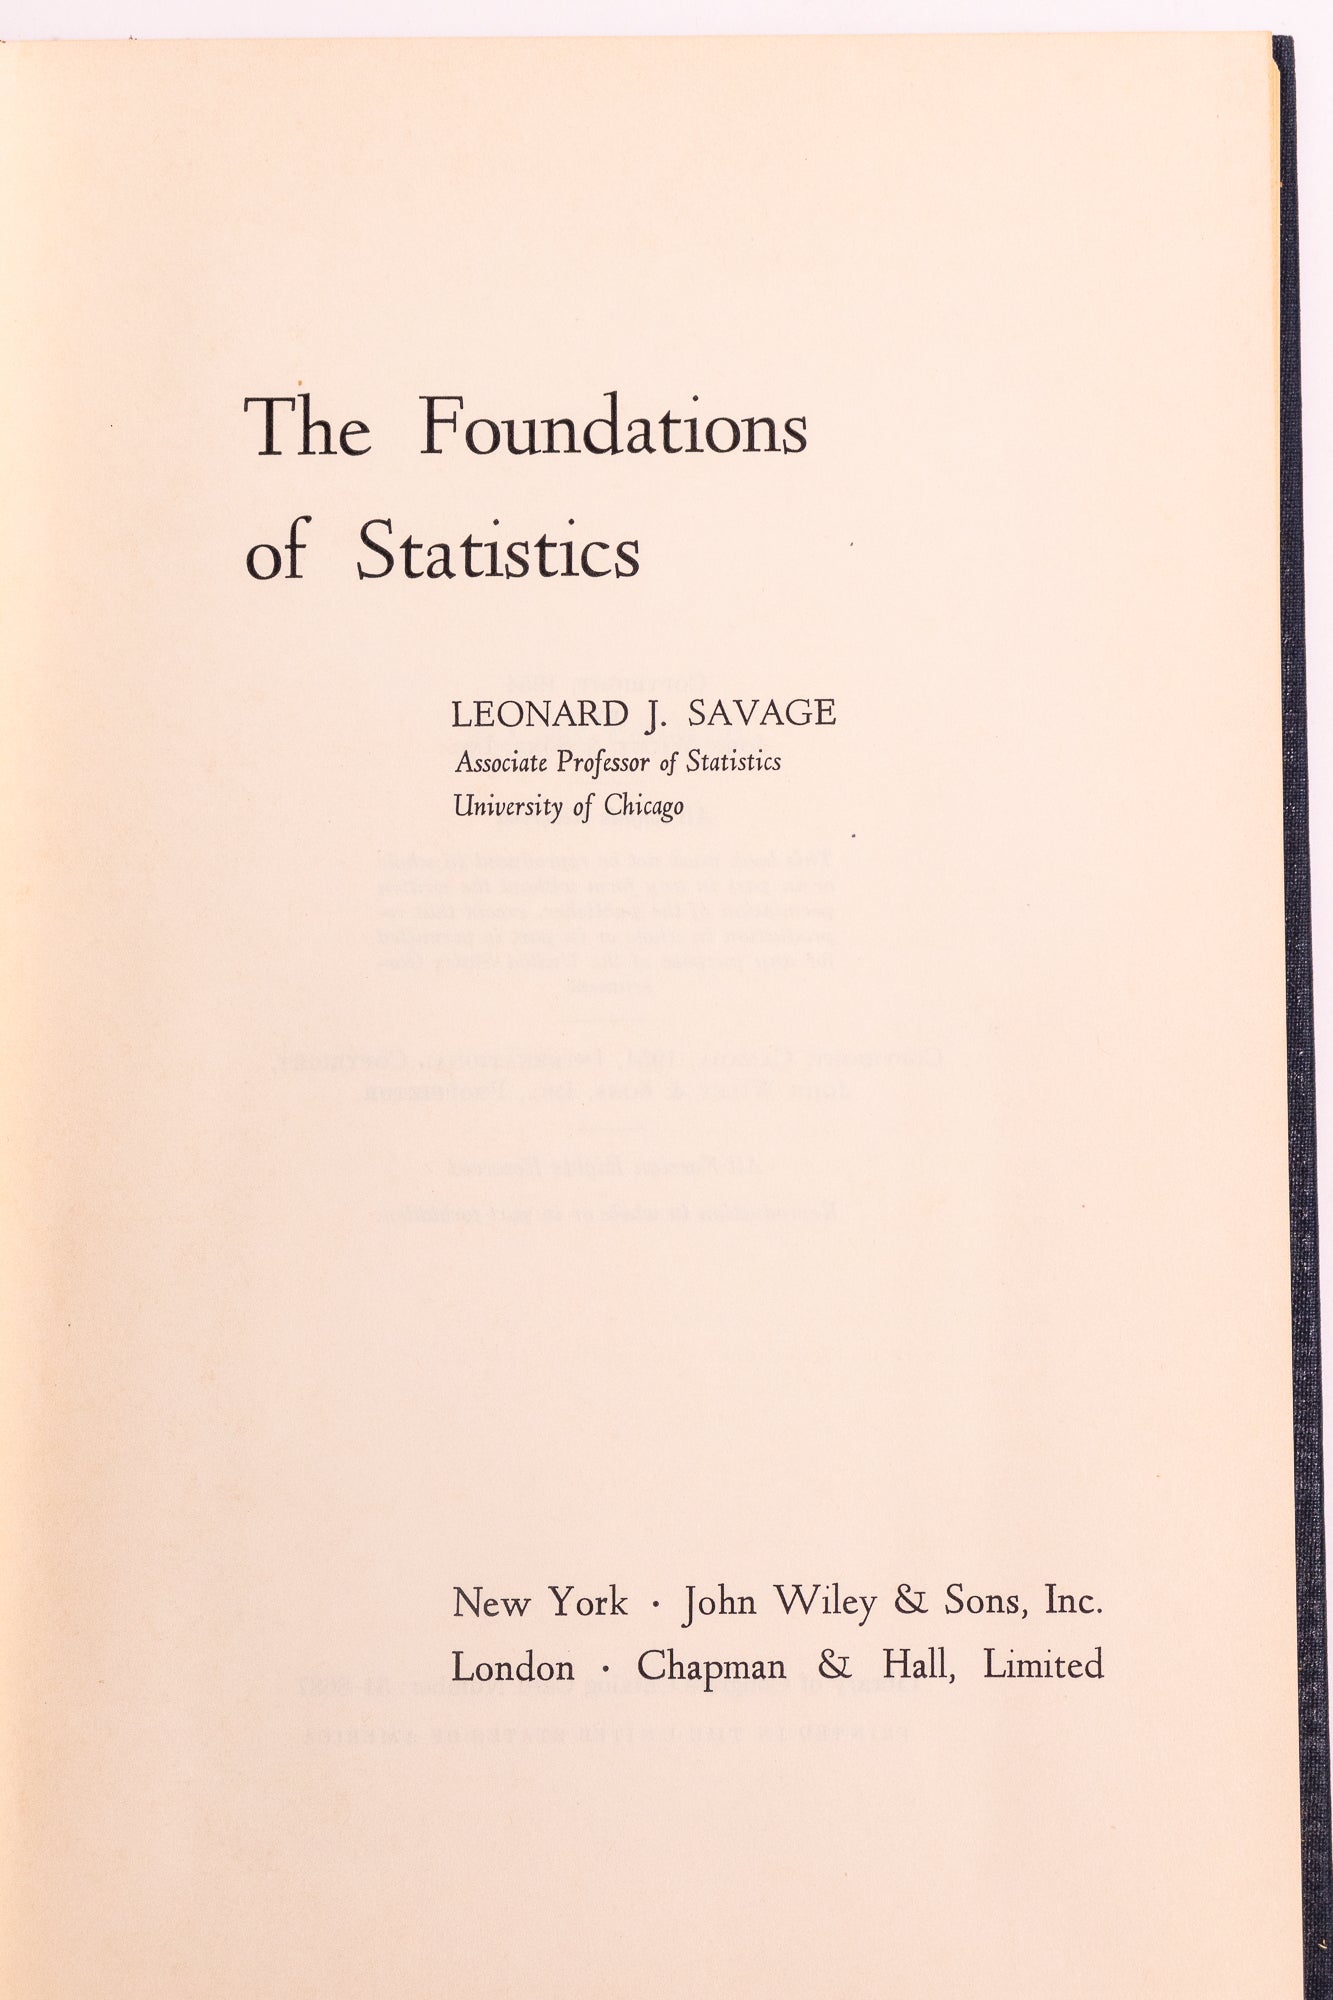 The Foundations of Statistics - Stemcell Science Shop